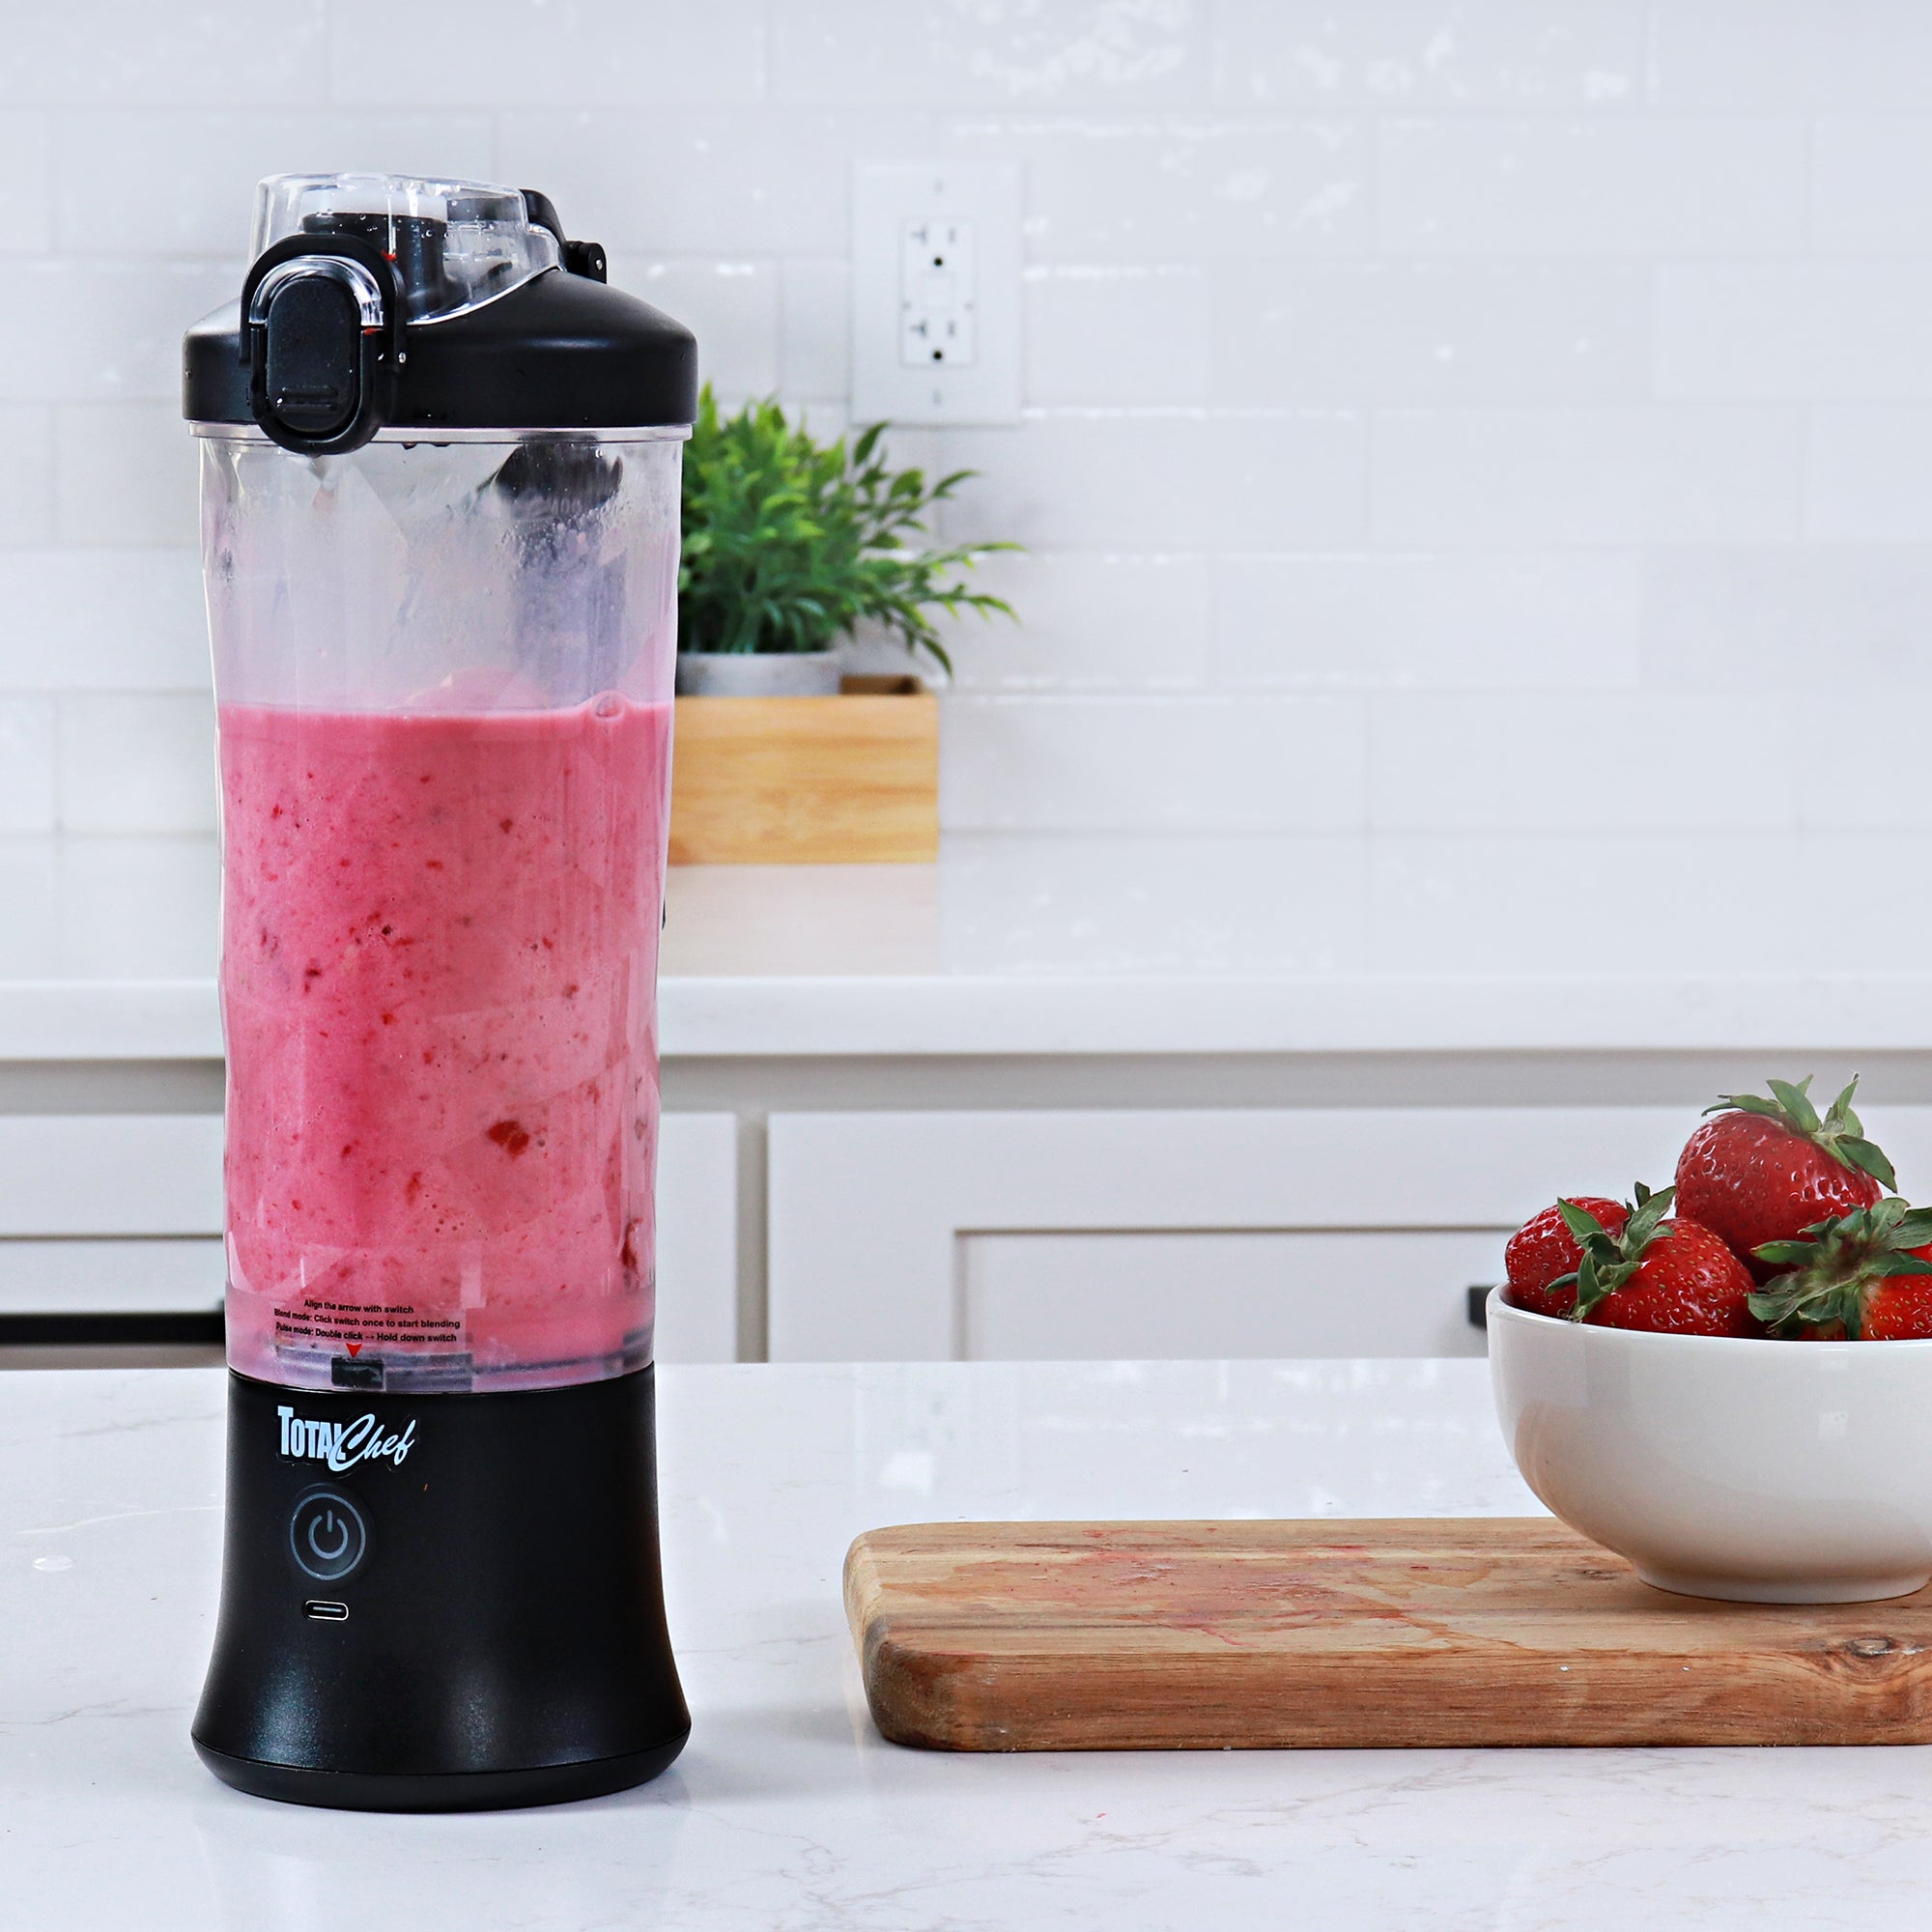 Lifestyle image of the Total Chef portable rechargeable blender filled with bright pink smoothie in a white kitchen with a wooden cutting board and a white bowl of strawberries beside it.